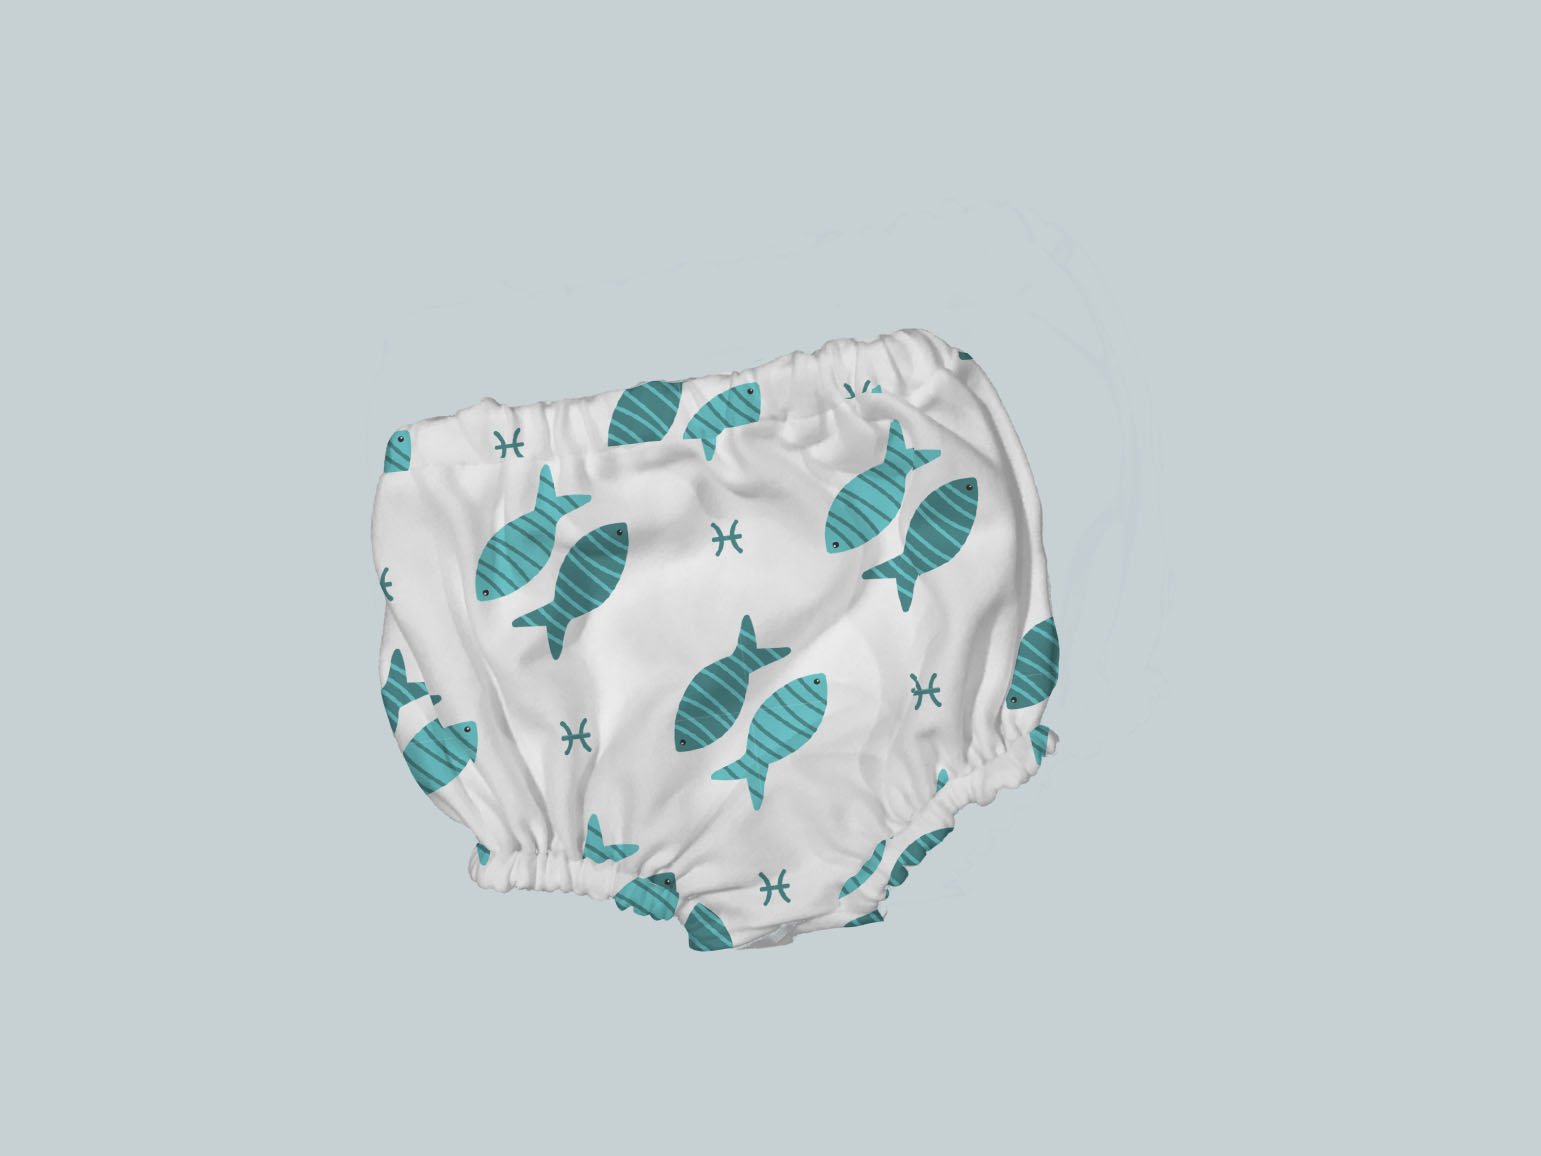 Bummies/Diaper Cover - Two Blue Fish